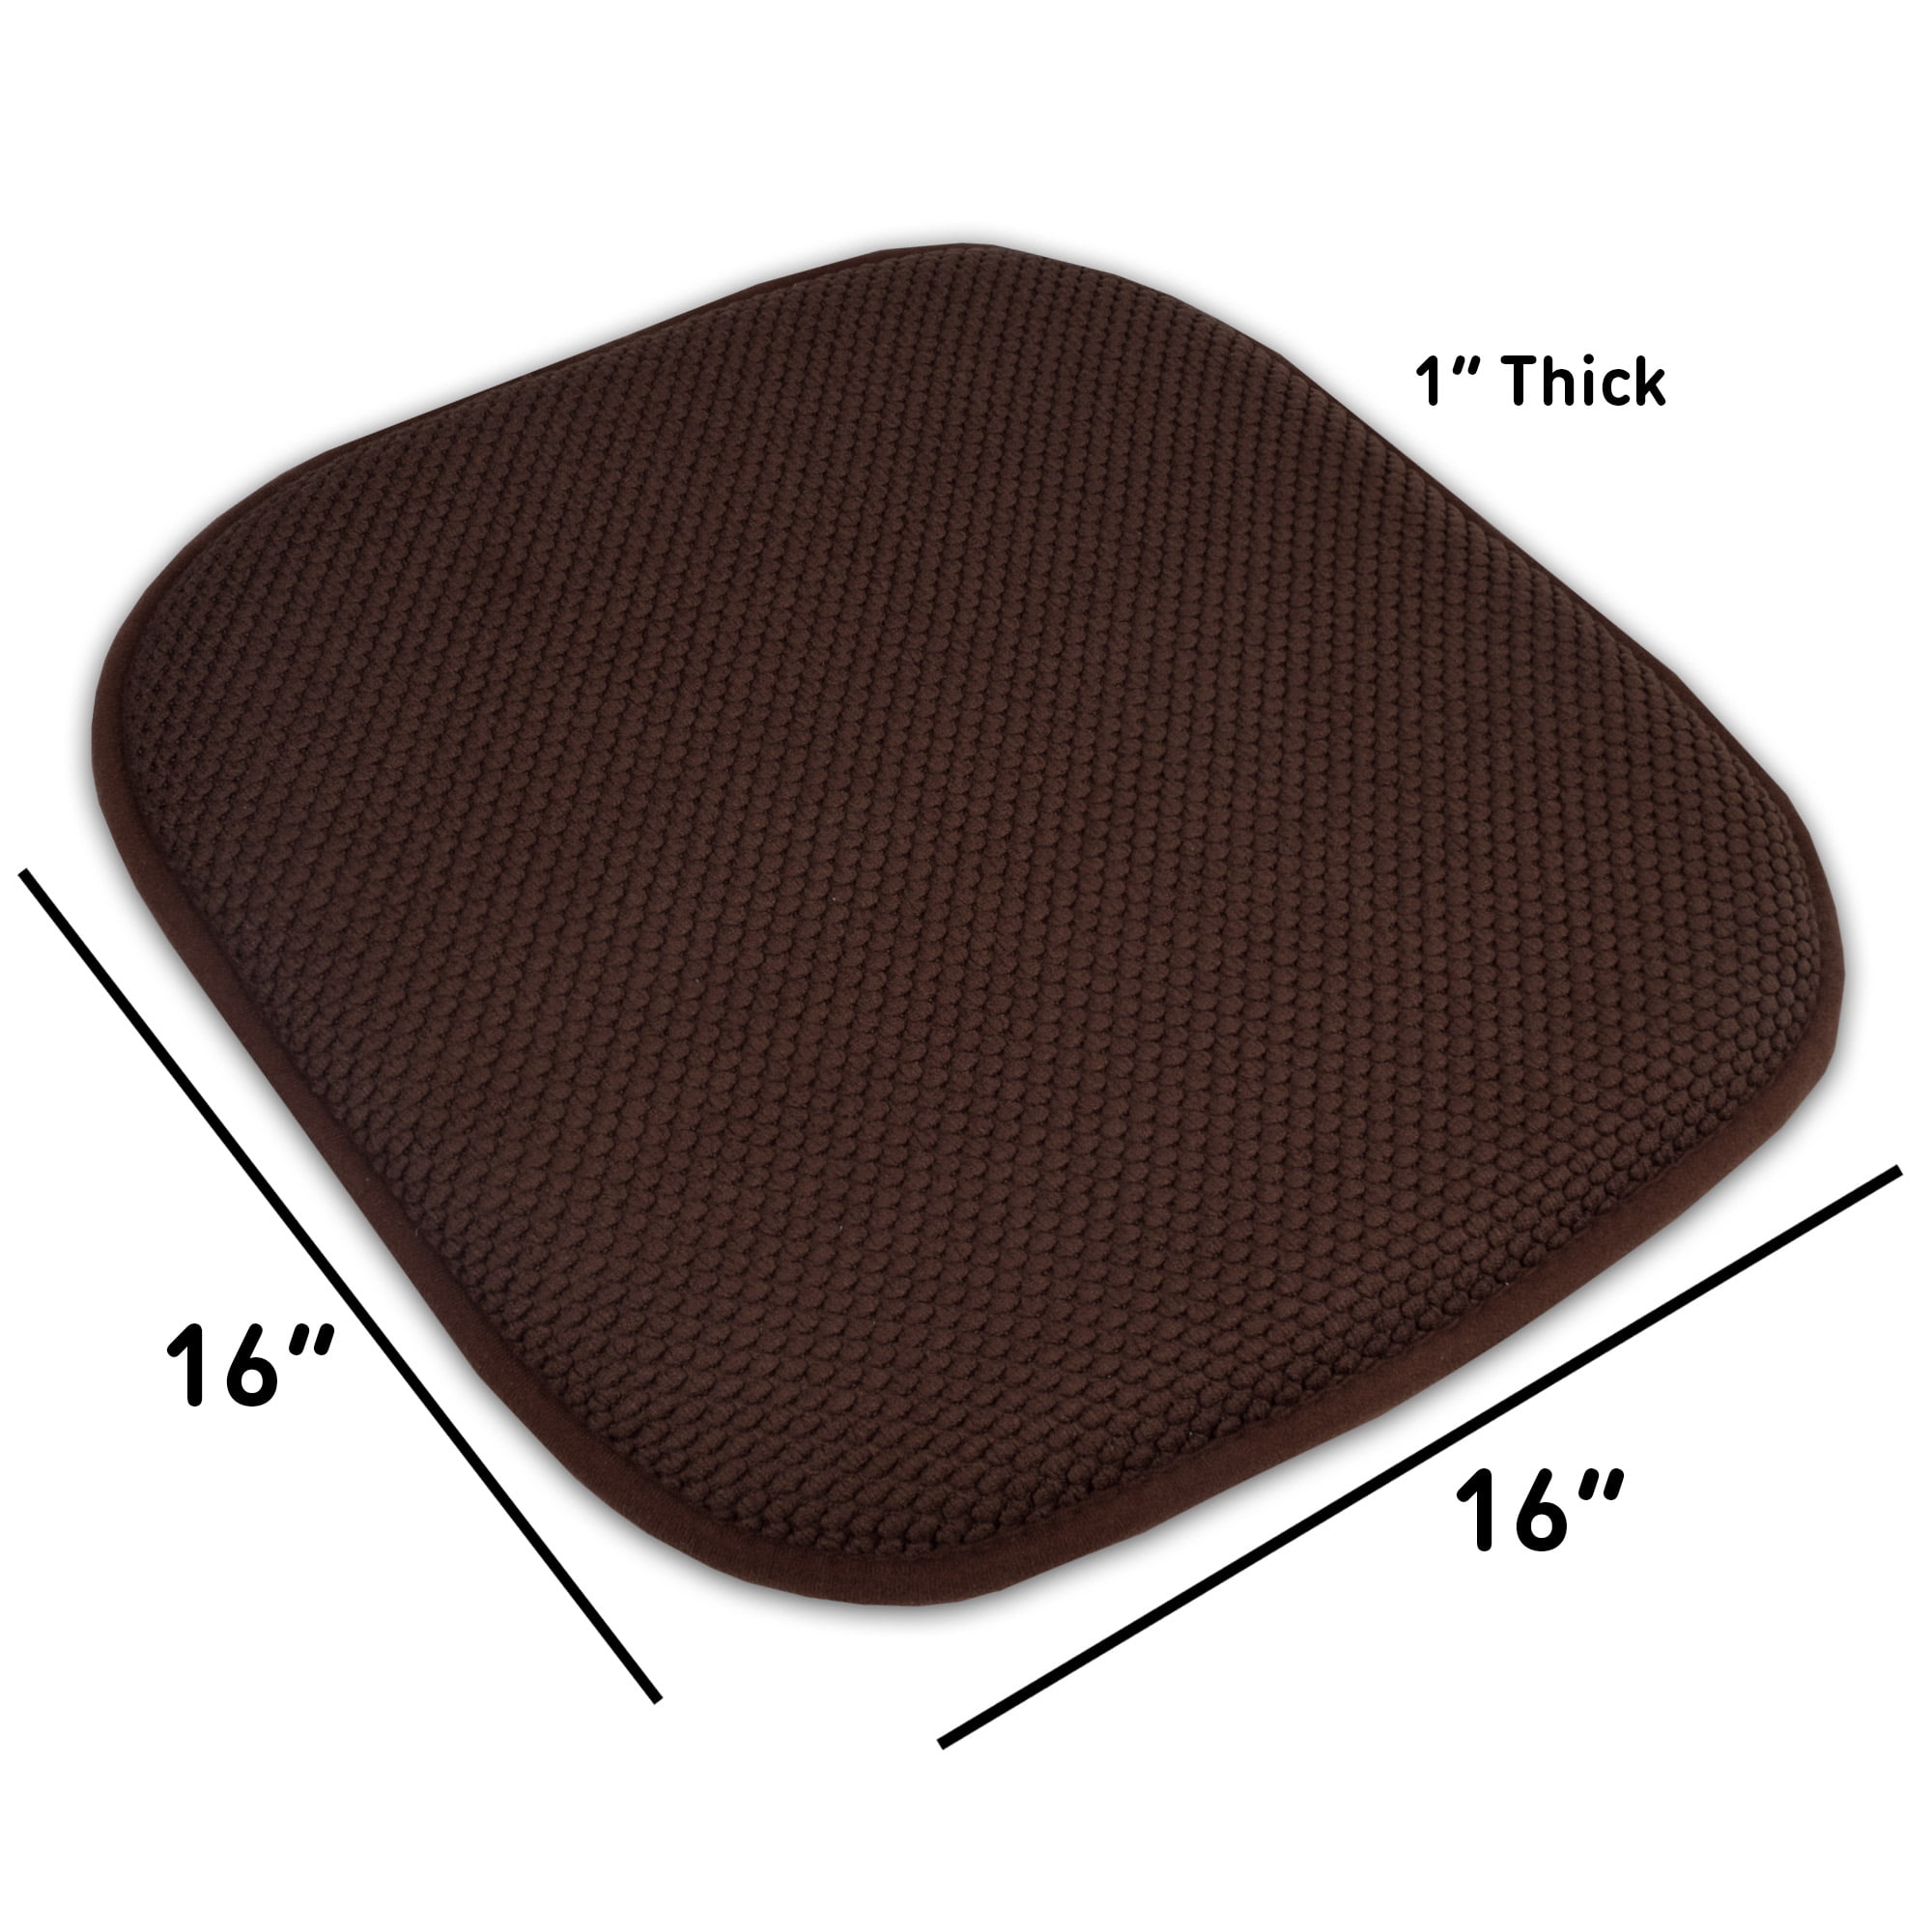 4 8 Details about   Memory Foam Honeycomb Non-Slip Chair/Seat 16" x 16" Cushion Pad 2 12 Pack 